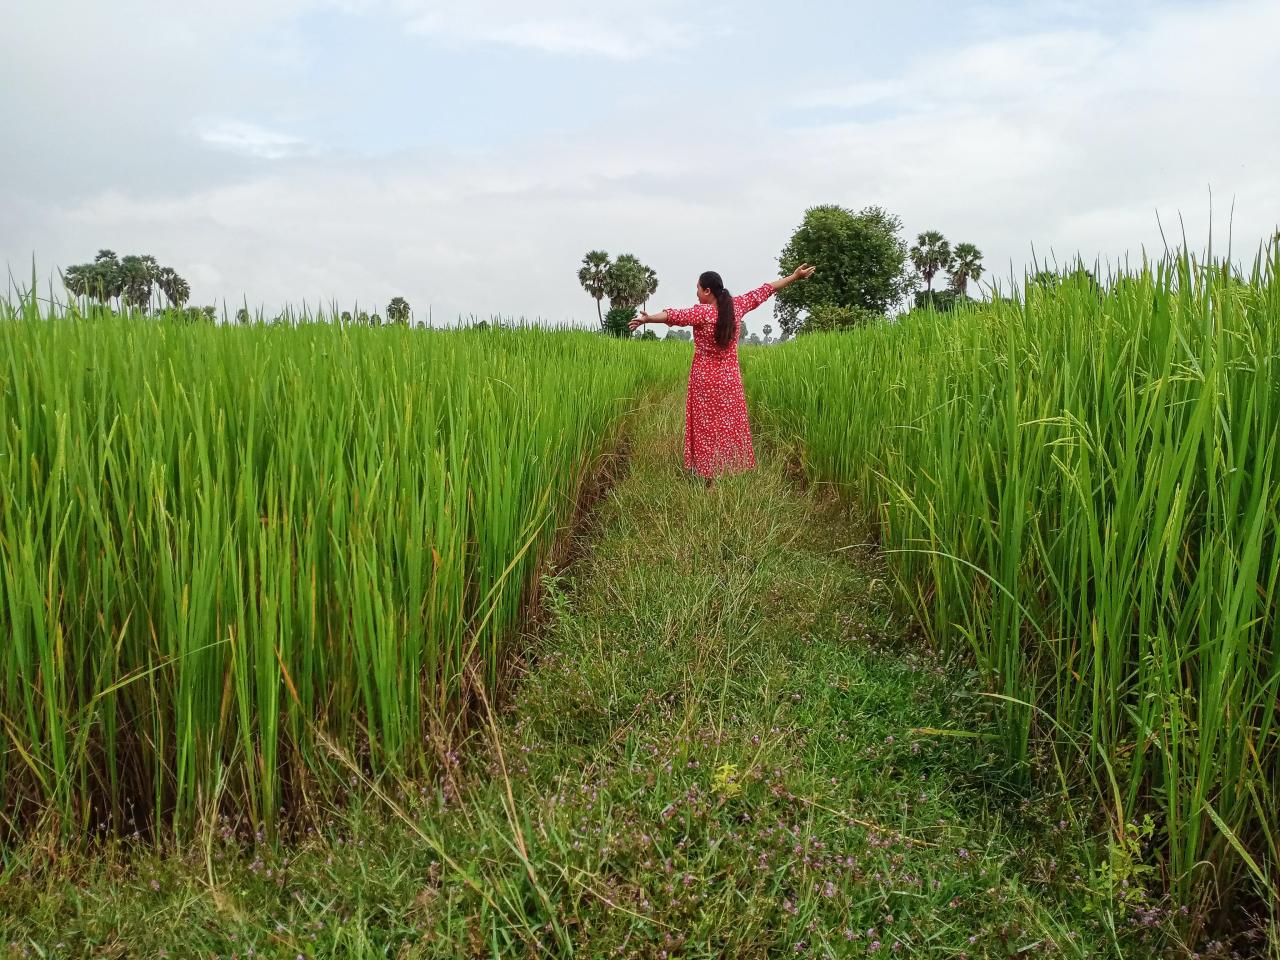 A woman in a red dress standing in rice fields